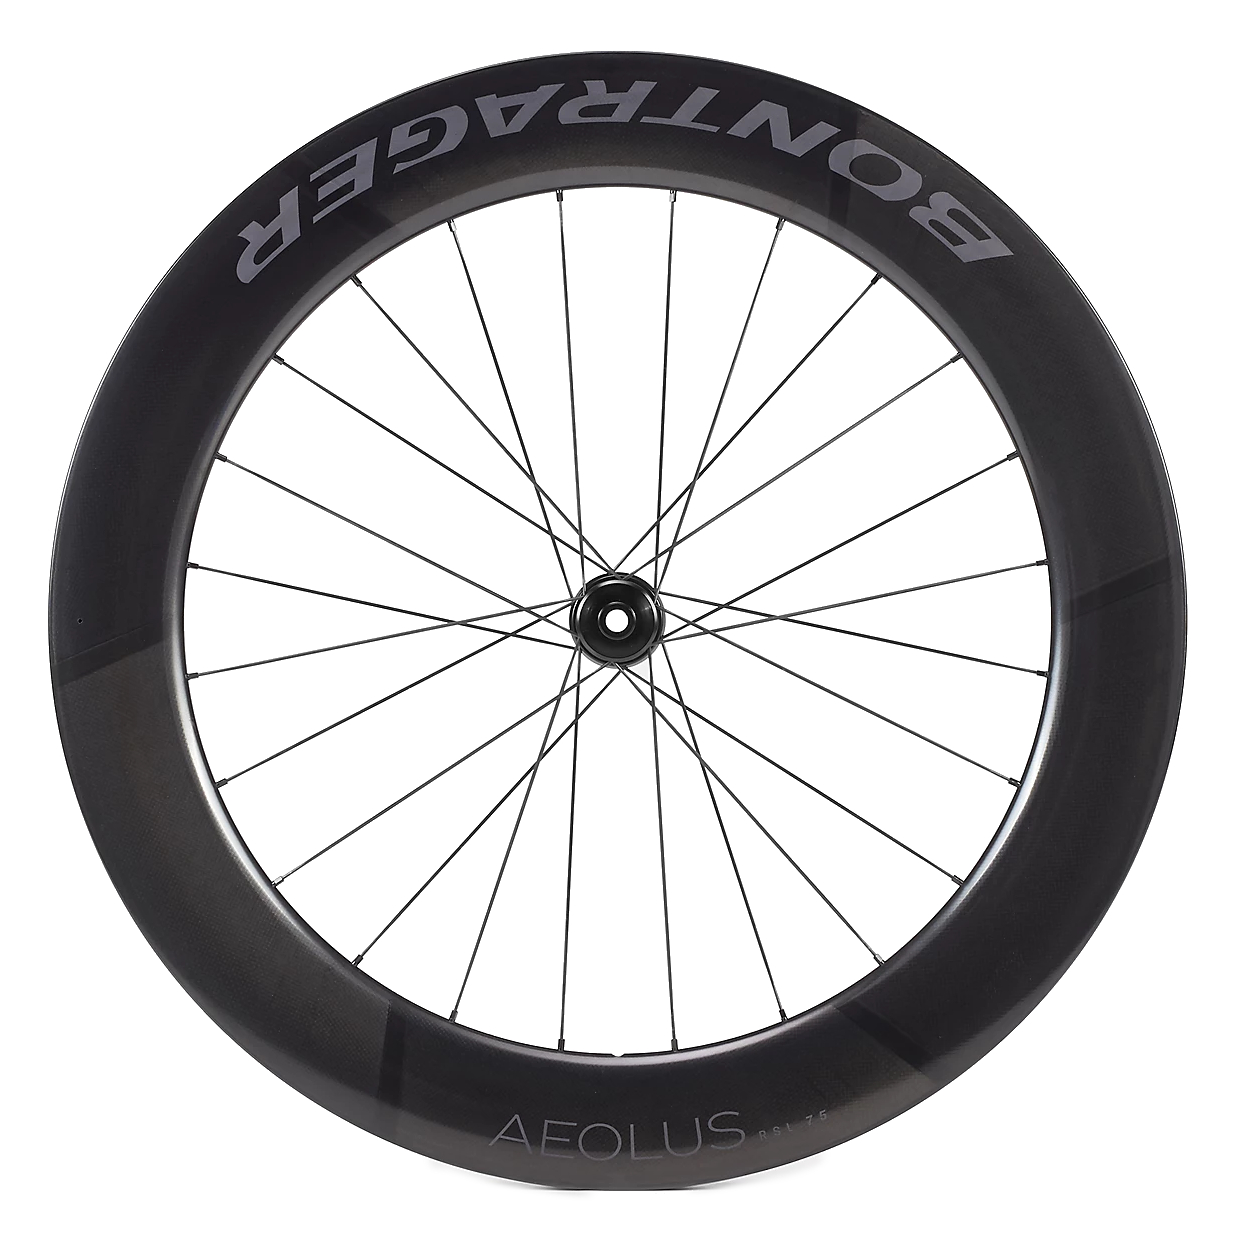 Picture of Bontrager Aeolus RSL 75 TLR Disc Carbon Front Wheel - Clincher / Tubeless - Centerlock - 12x100mm